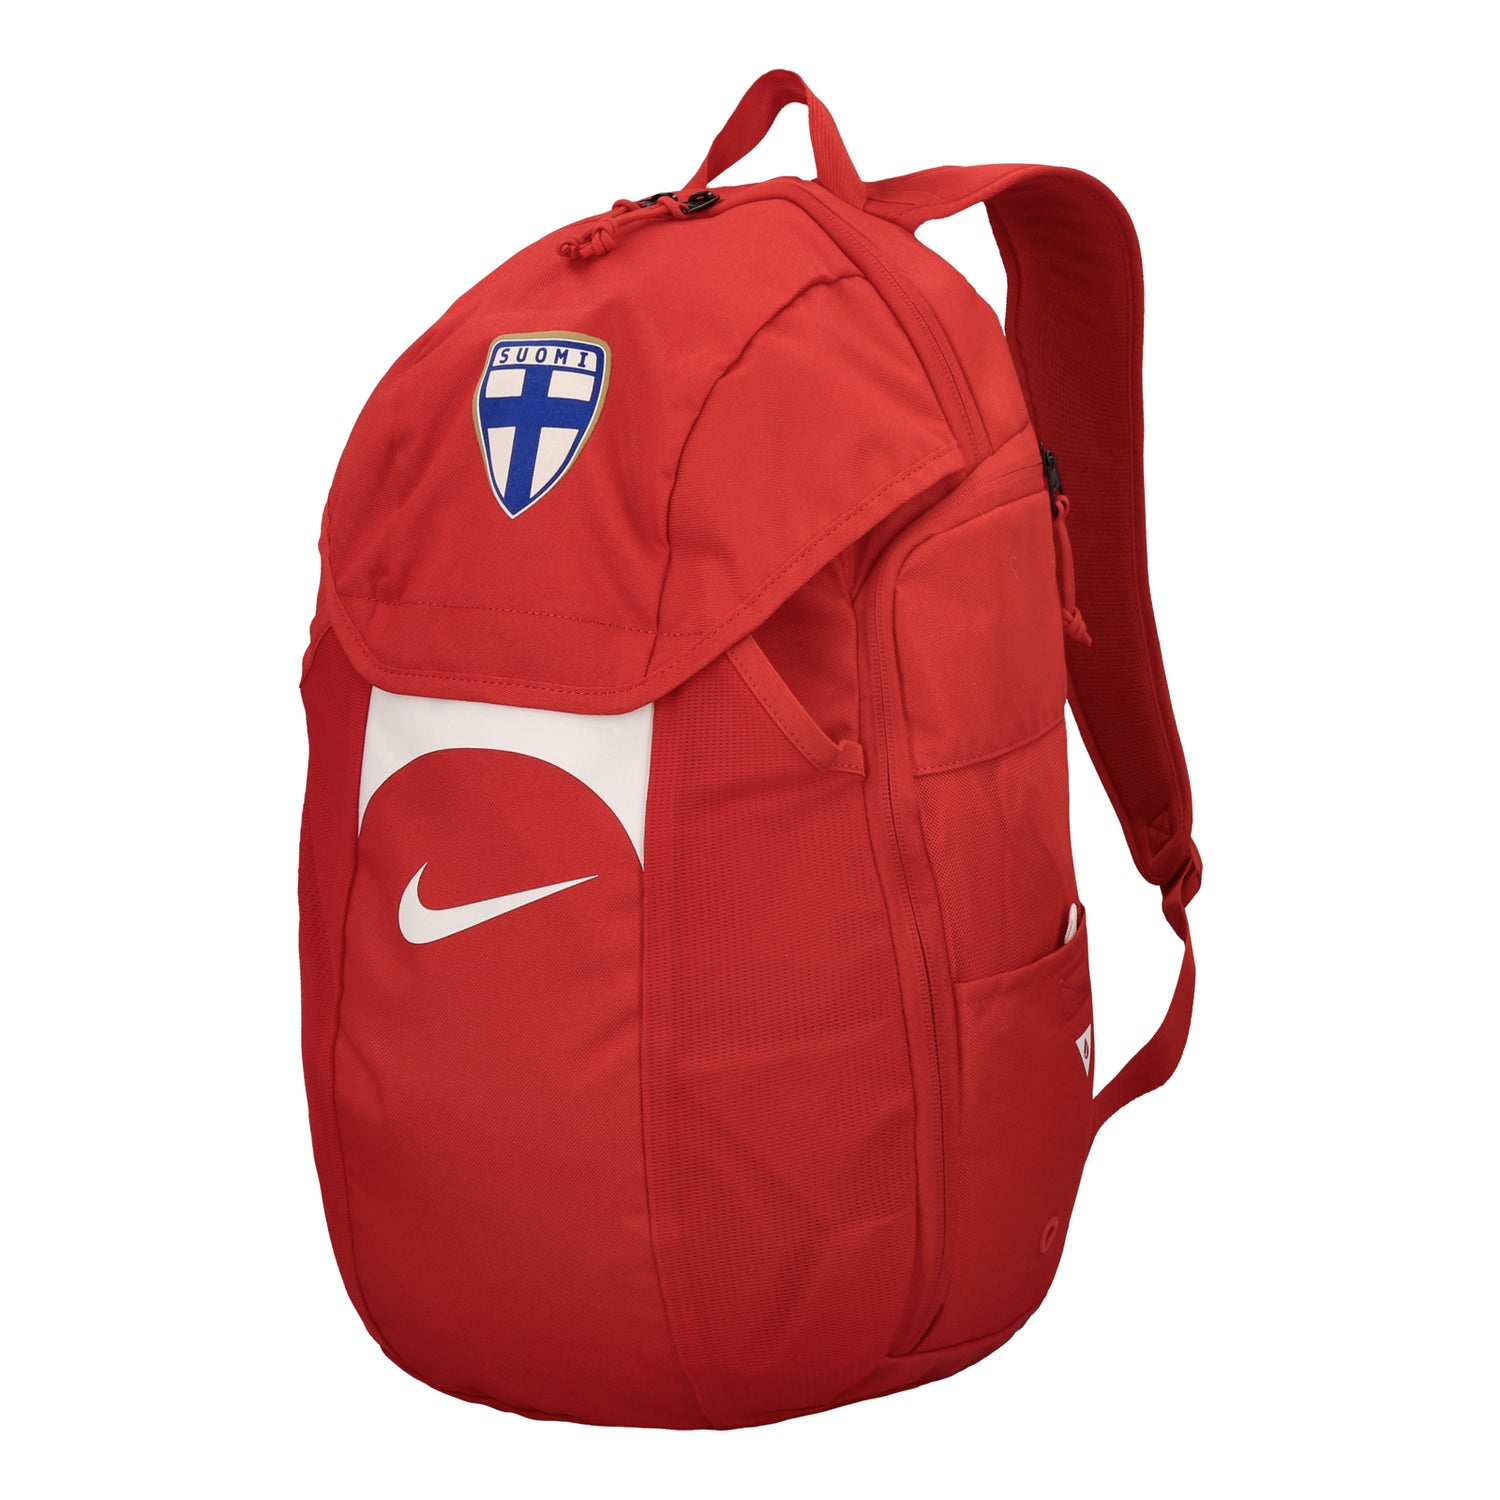 Academy Team Storm-FIT Soccer Backpack, with Ball Pocket